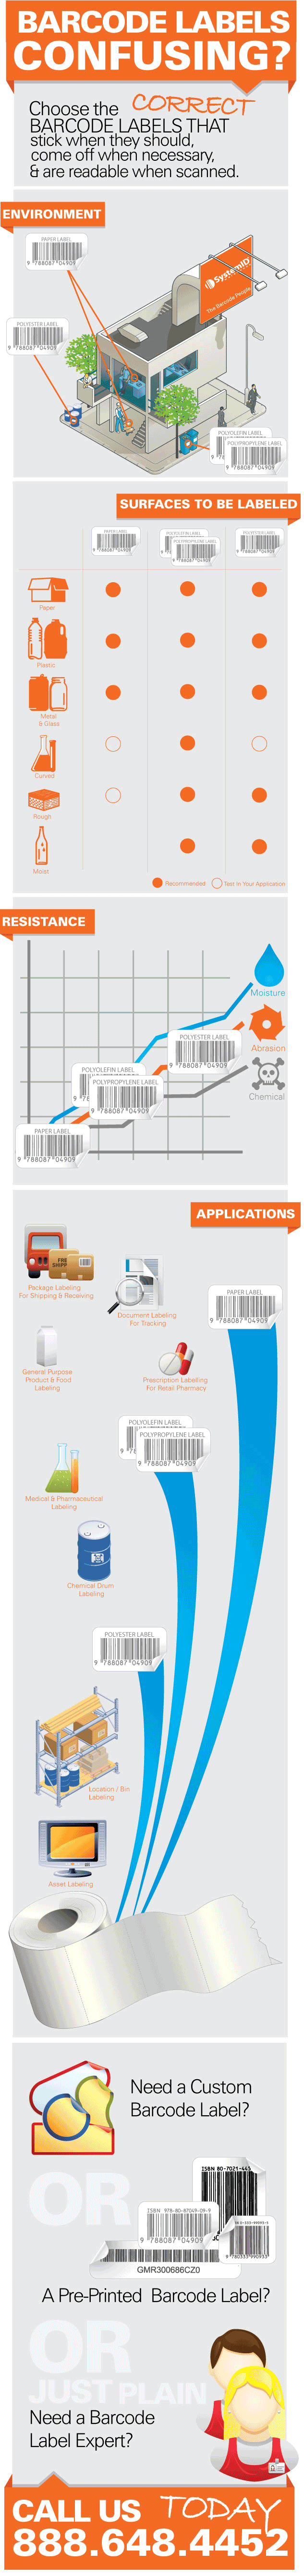 Barcode Labels Infographic